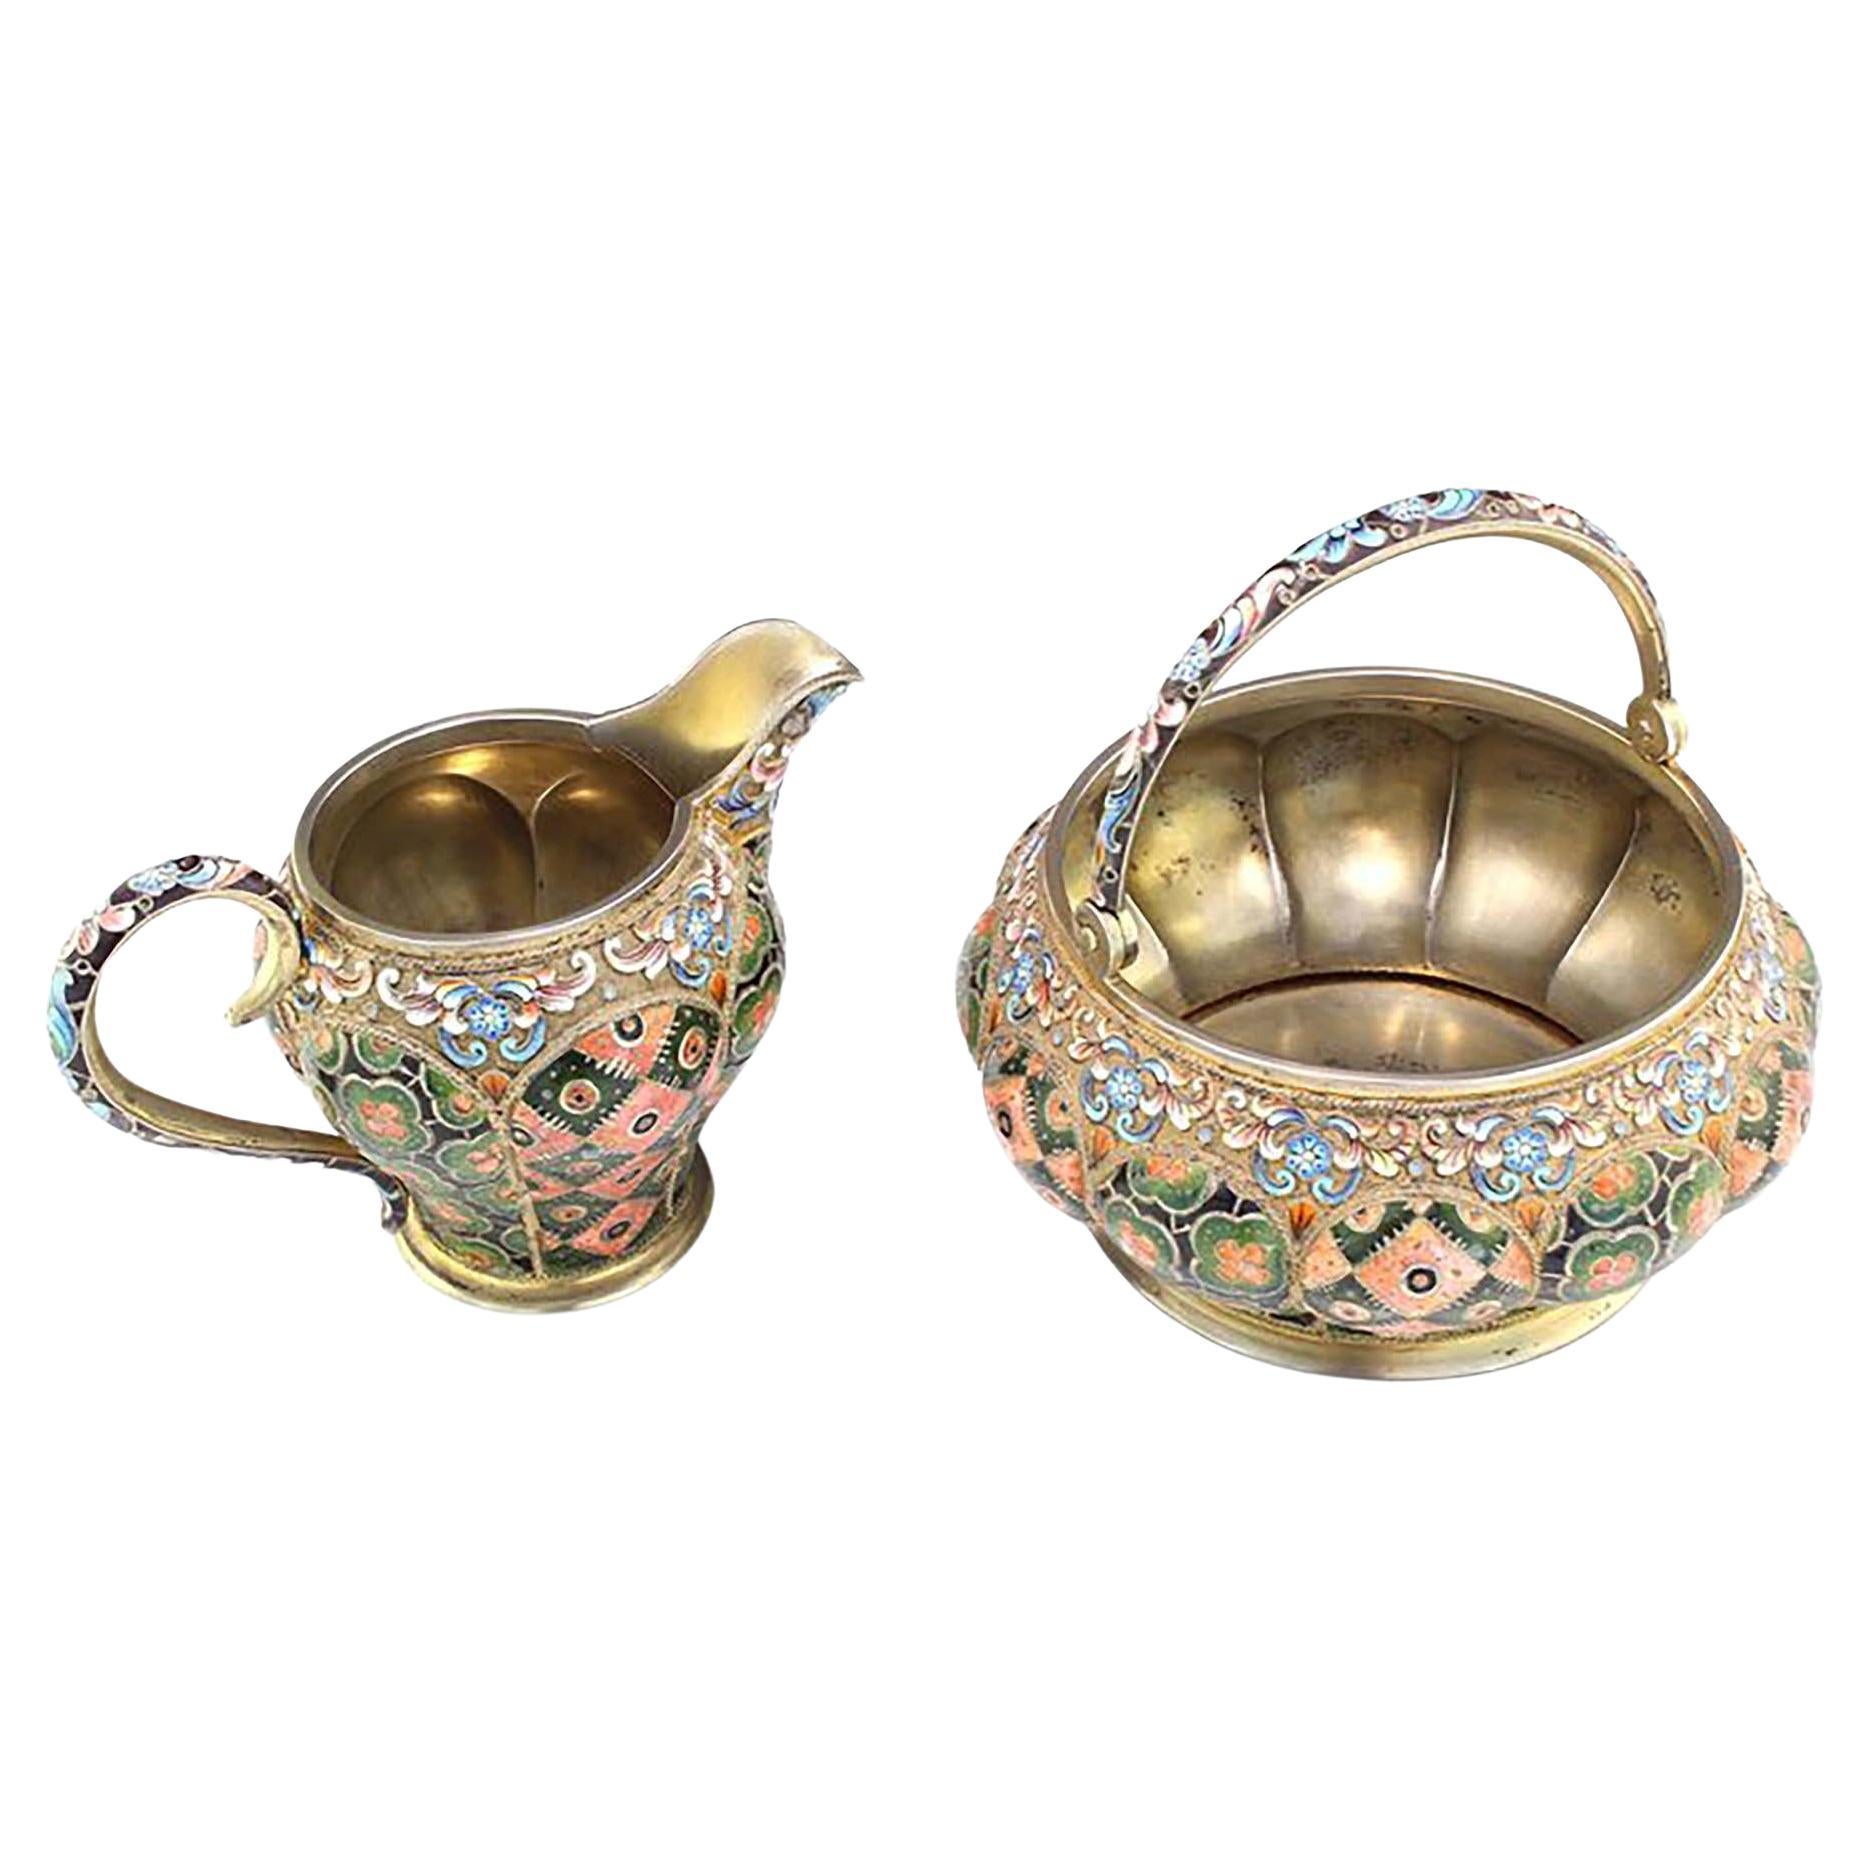 Russia Silver-Gilt and Cloisonné Enamel Sugar Bowl and Creamer For Sale